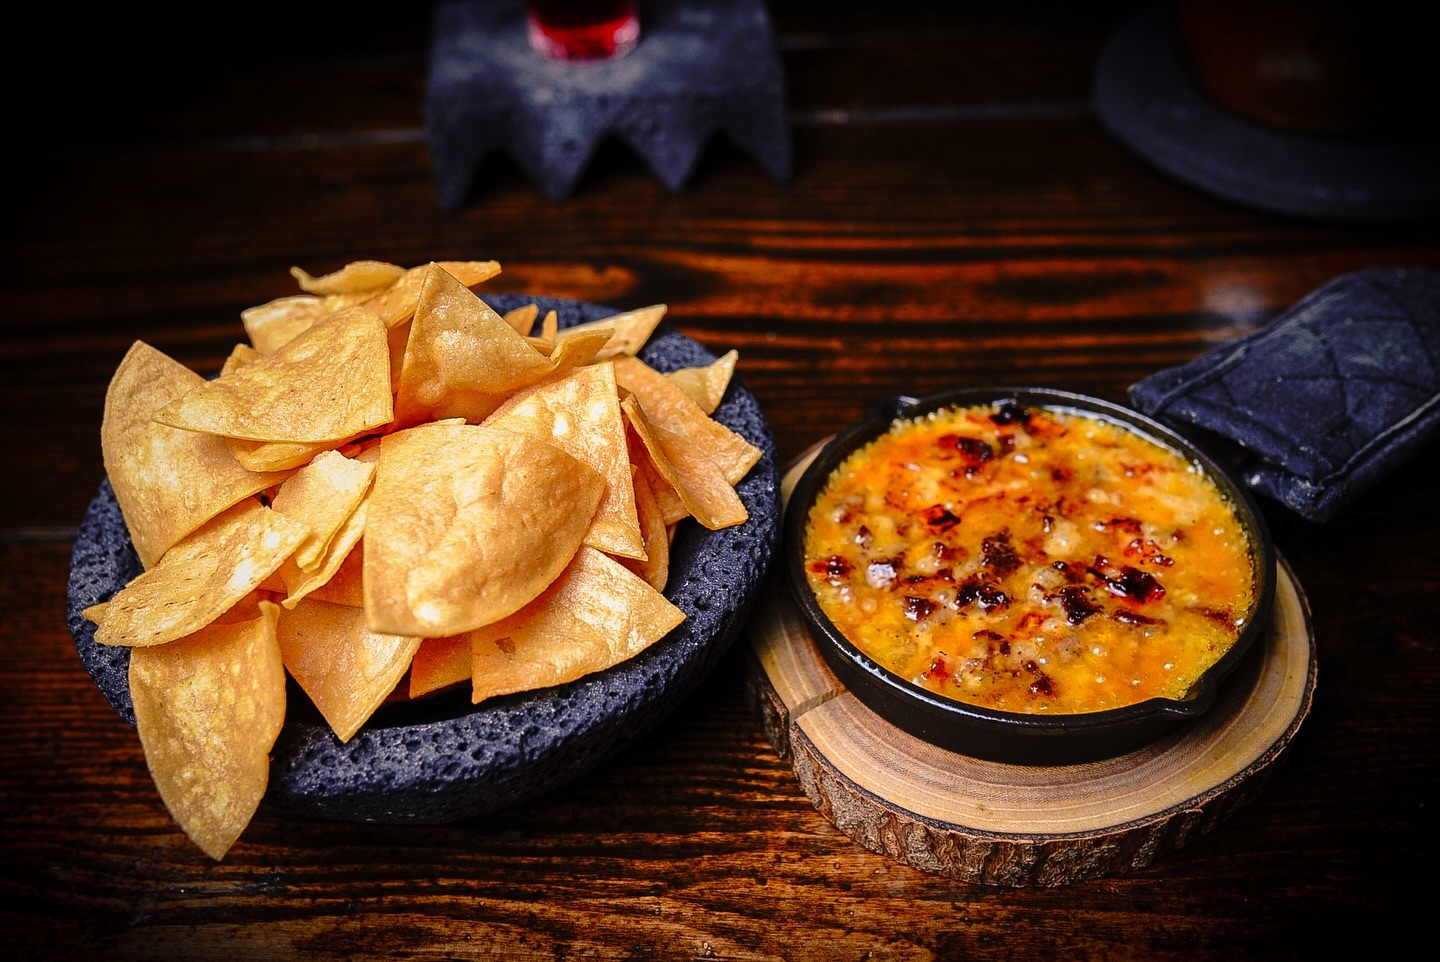 A bowl of crispy tortilla chips beside a dish of bubbling hot cheese dip, served on a wooden table with rustic decor.